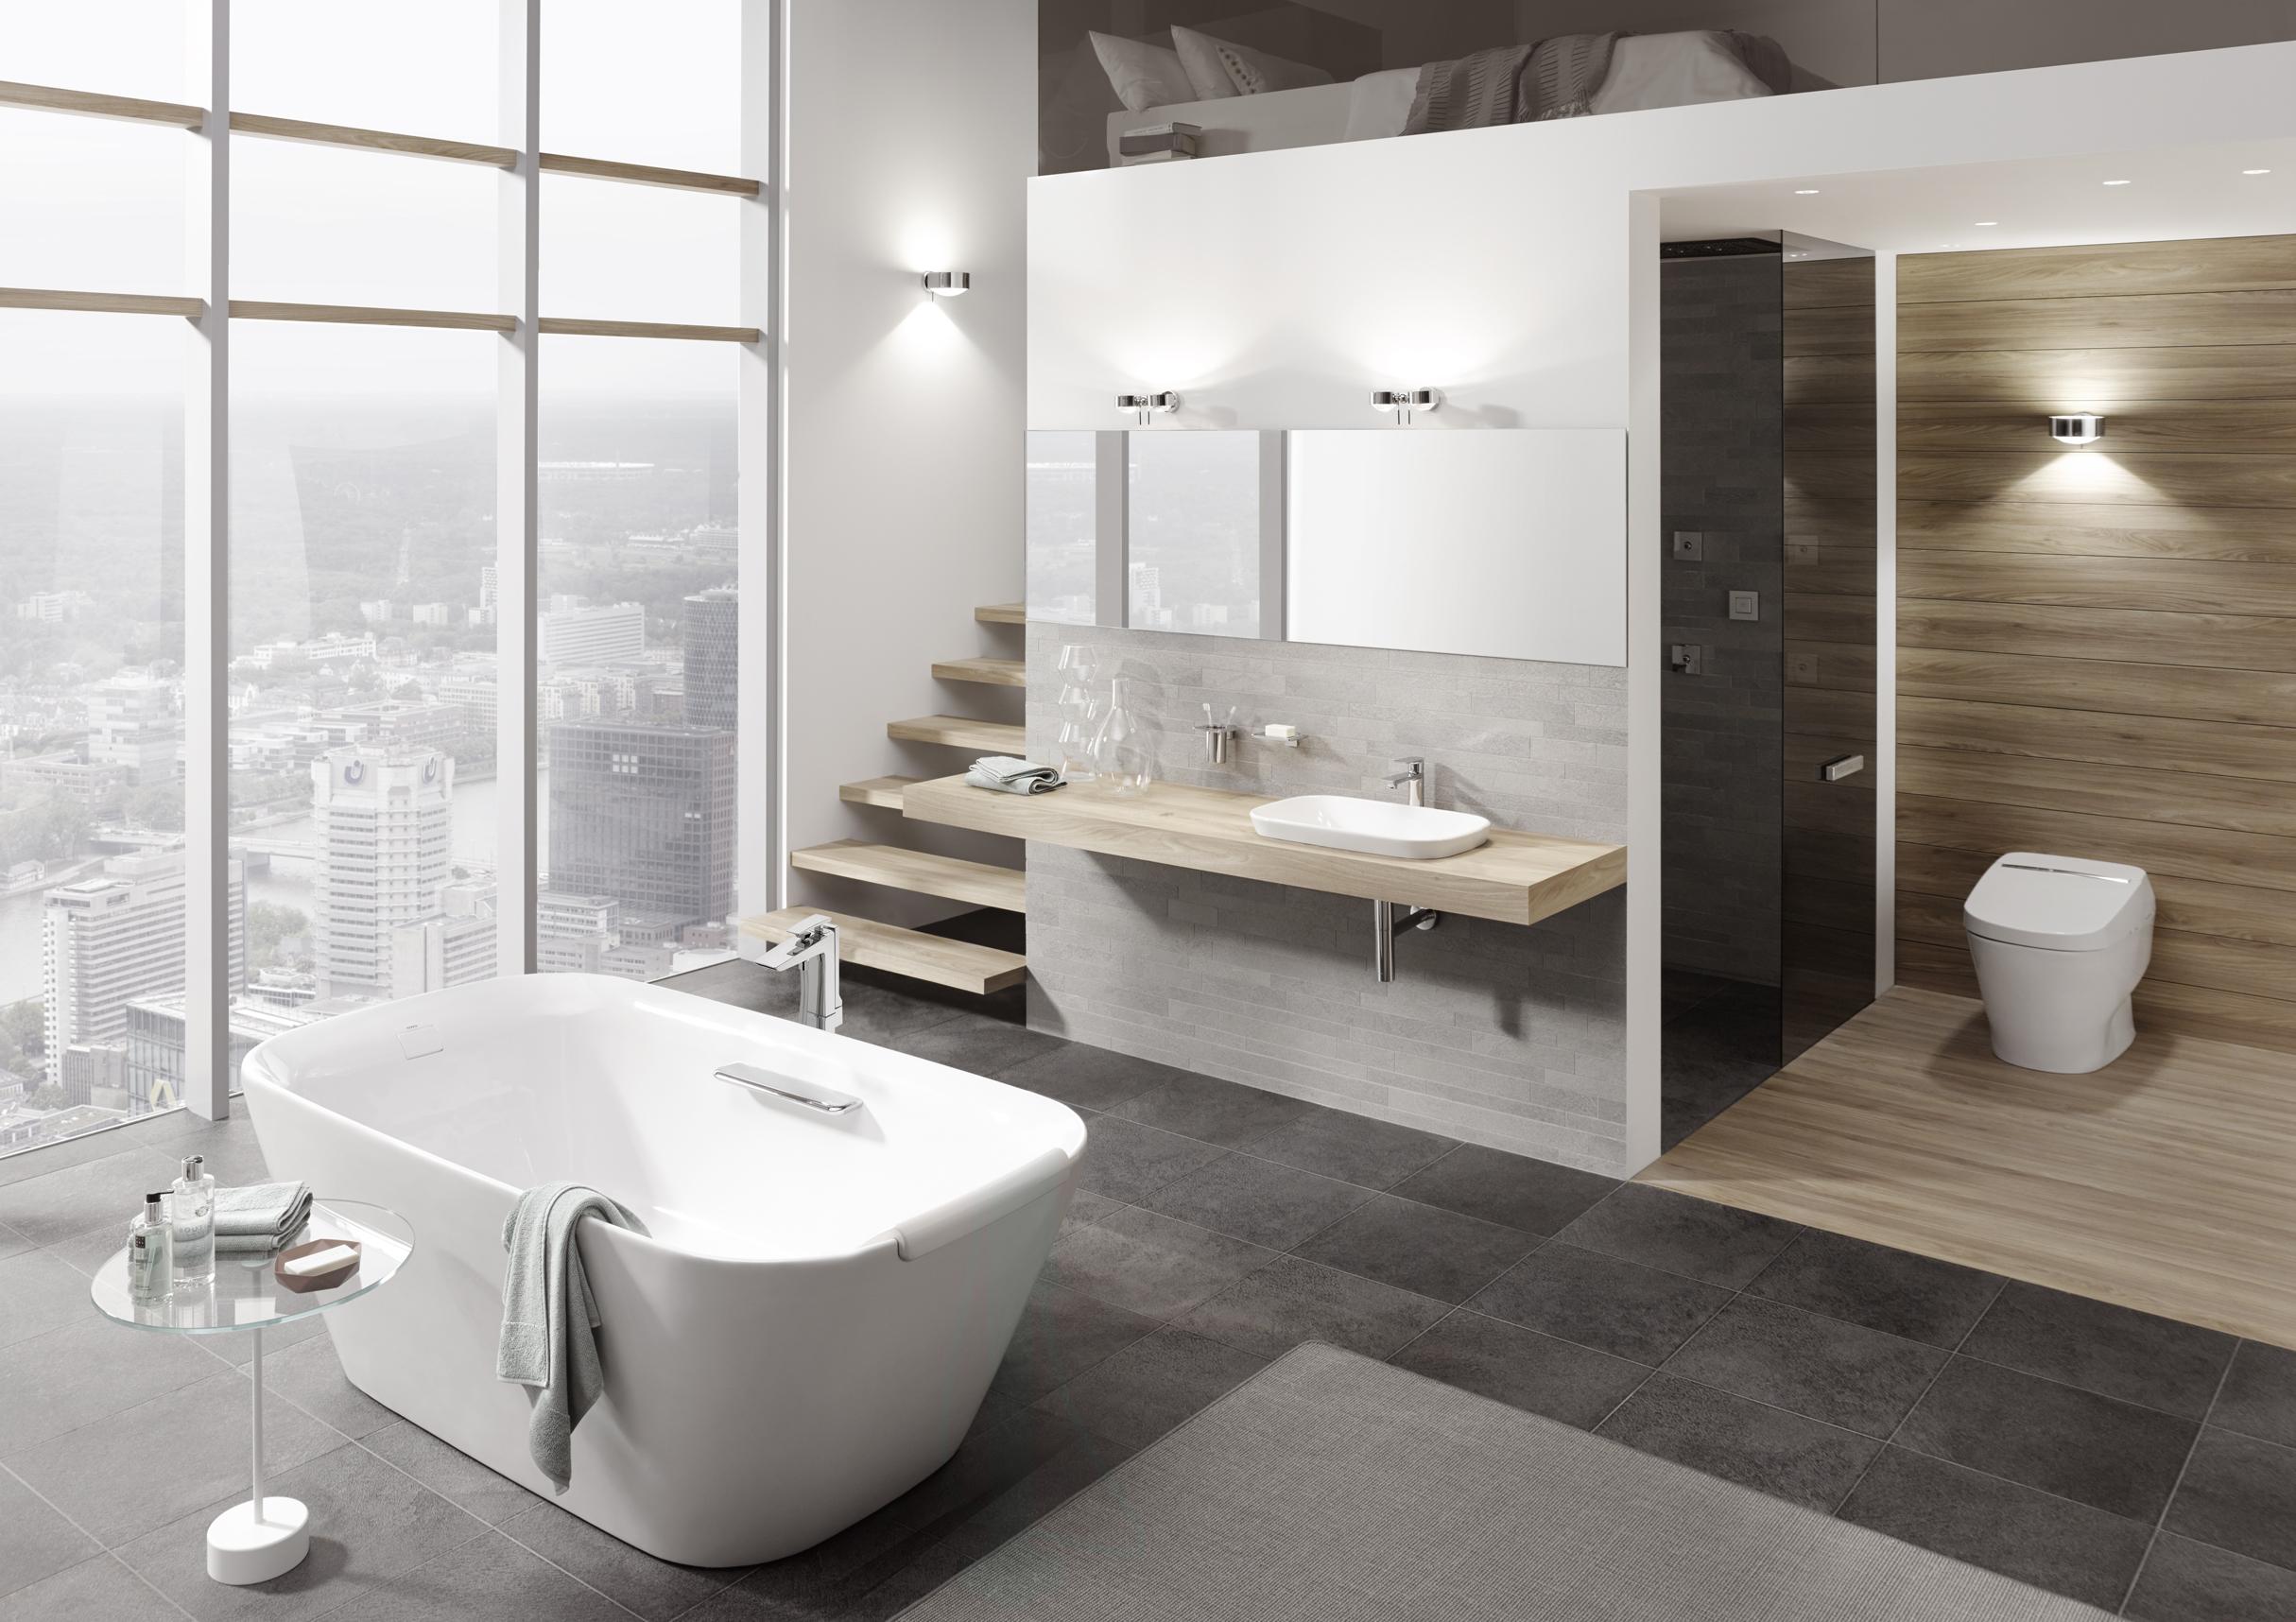 A bathroom with a range of TOTO’s state-of-the-art furnishings